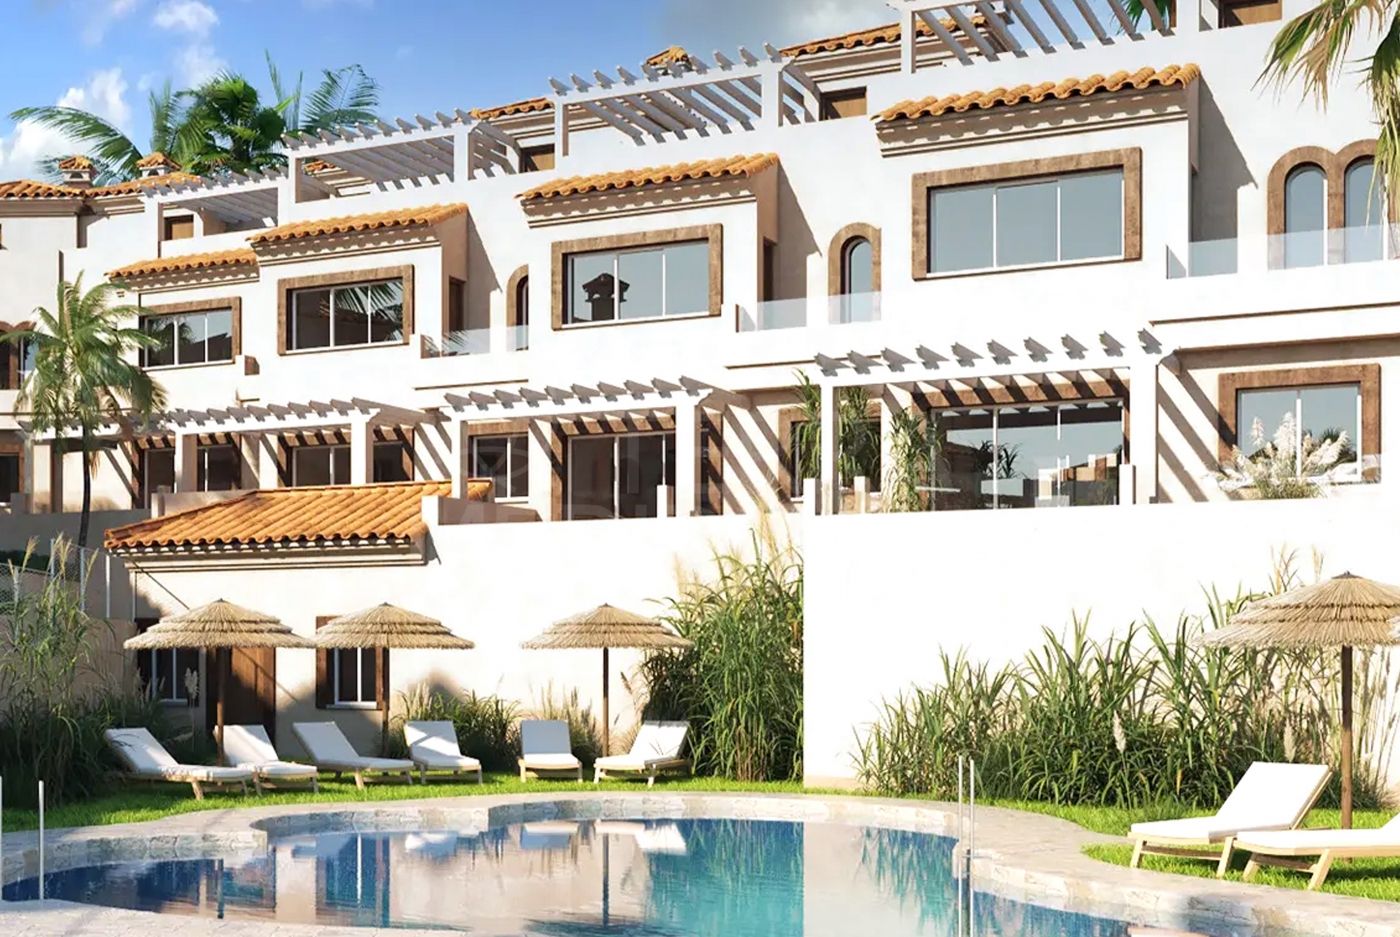 Brand new 3 bedroom townhouse in contemporary architecture for sale in Agra Residencial, Estepona